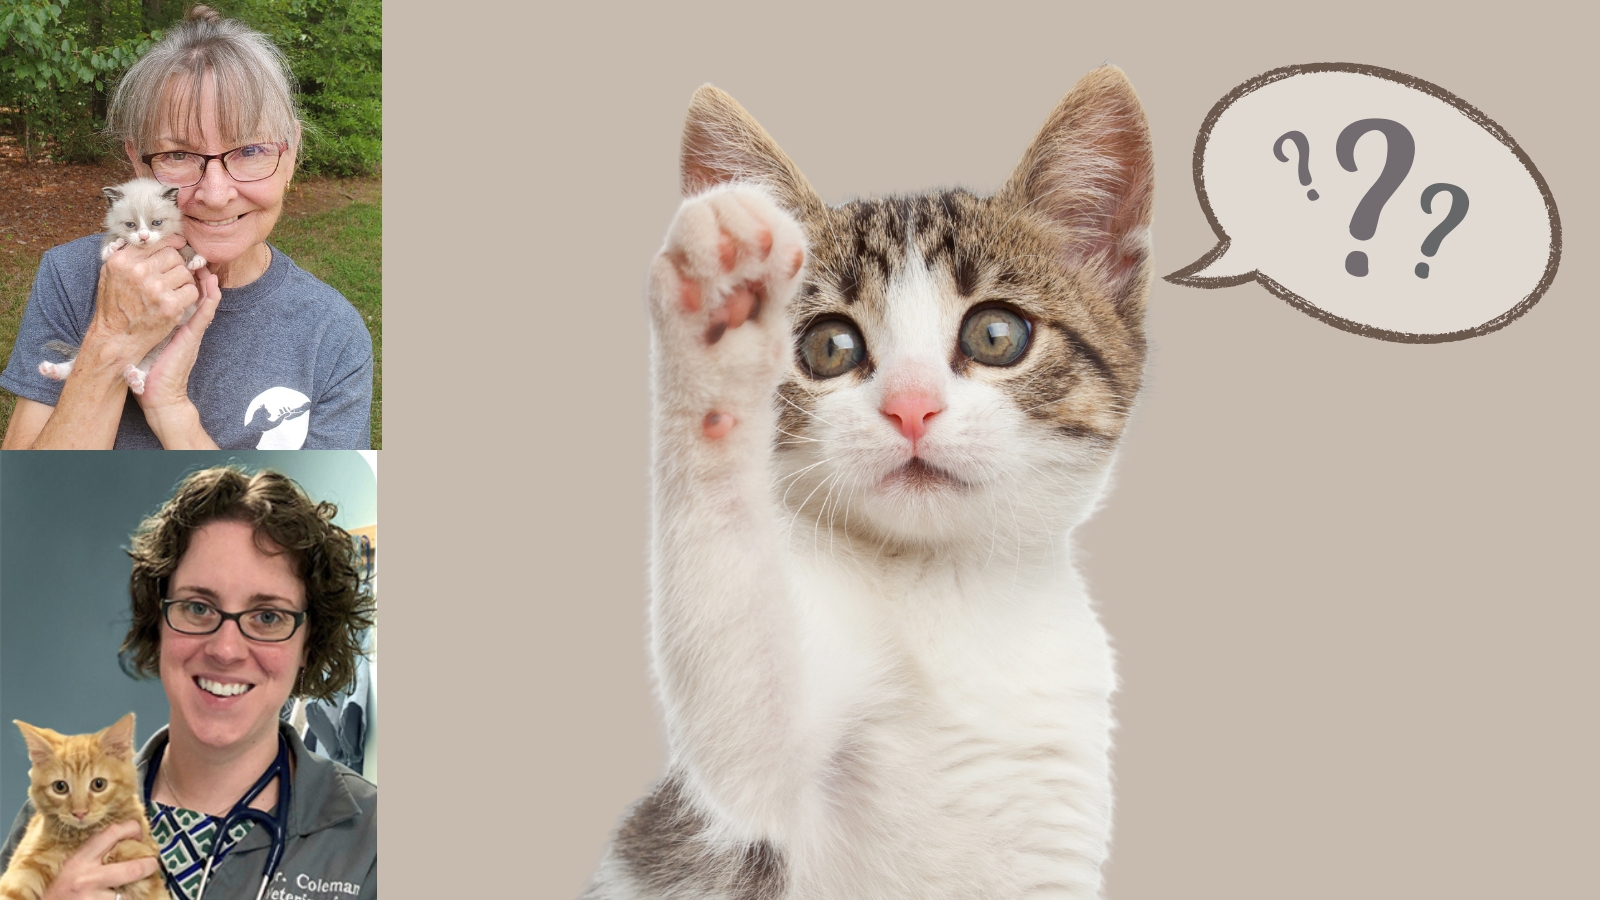 photos of susan spaulding and emily coleman with kitten raising paw to ask question